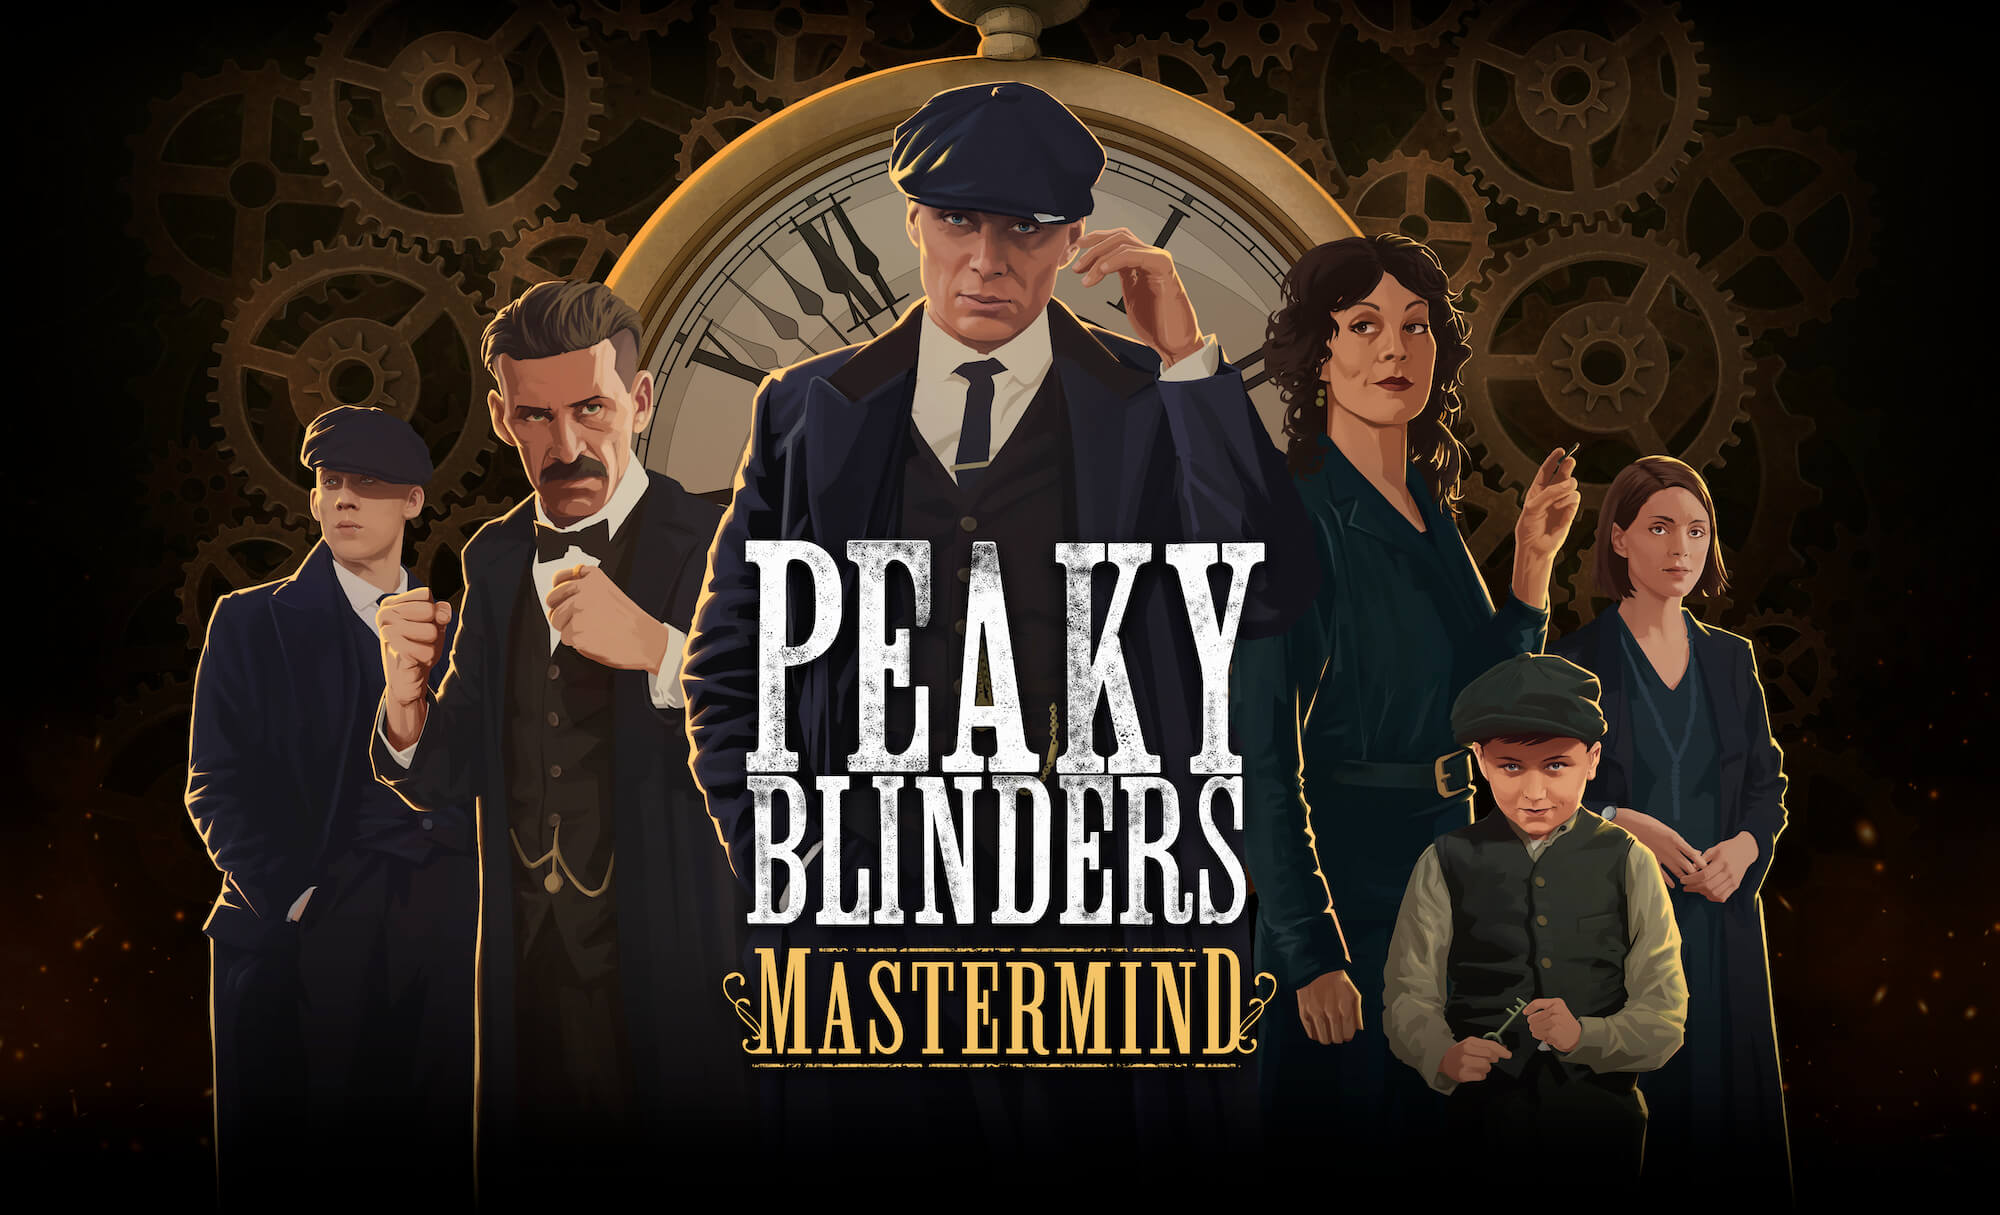 Peaky Blinders' Big Screen Debut: Inside Scoop on the Upcoming Movie and Spinoffs